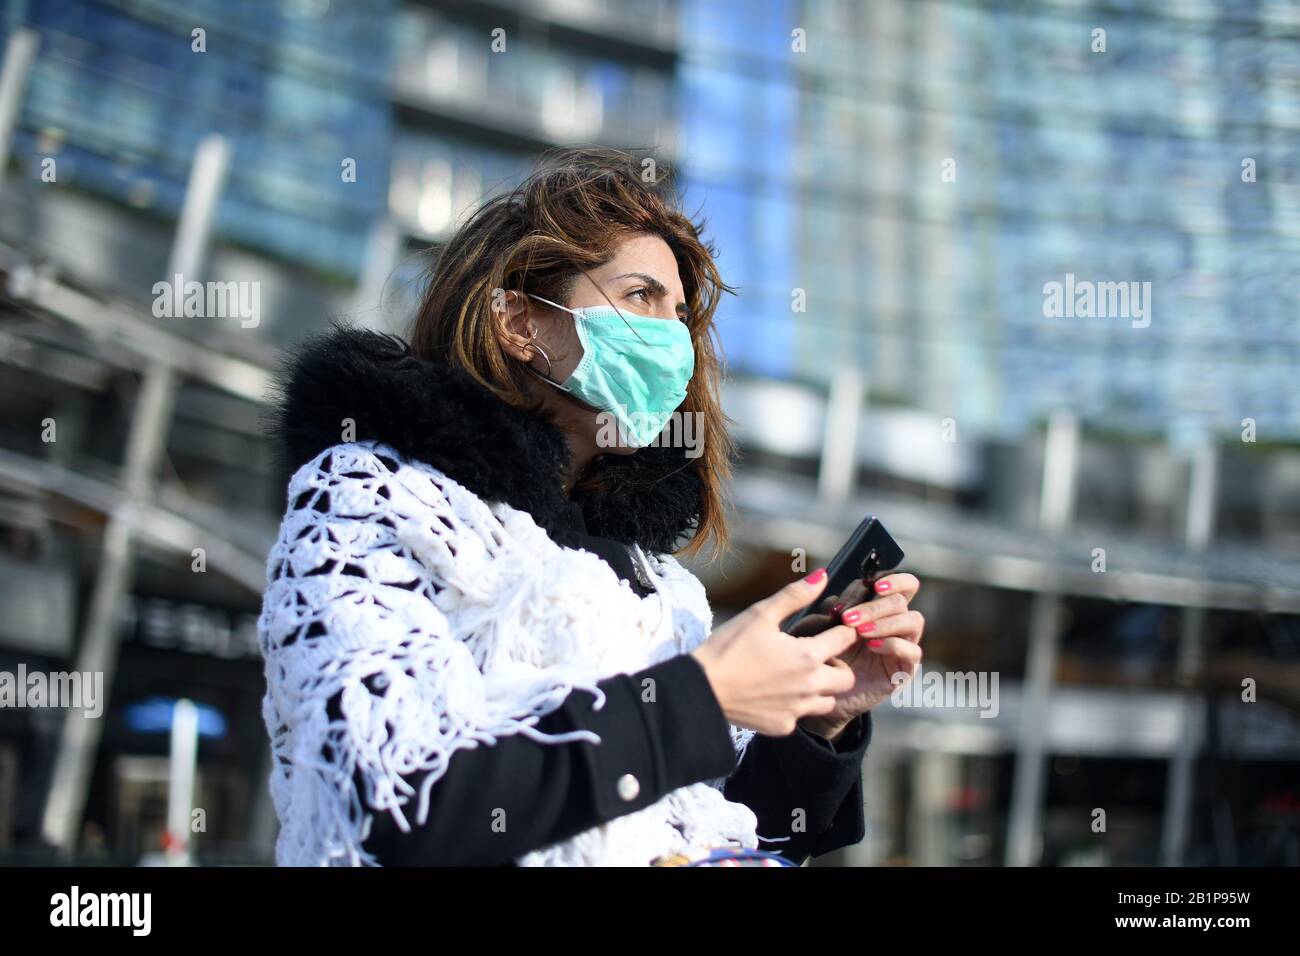 Milan, Italy. 26th Feb, 2020. A woman wears a face mask in Milan, Italy, Feb. 26, 2020. A total of 400 people have tested positive for the novel coronavirus in Italy till Wednesday evening. The government has placed 11 towns, 10 in Lombardy and one in Veneto, under lockdown in an effort to contain the epidemic. Credit: Daniele Mascolo/Xinhua/Alamy Live News Stock Photo